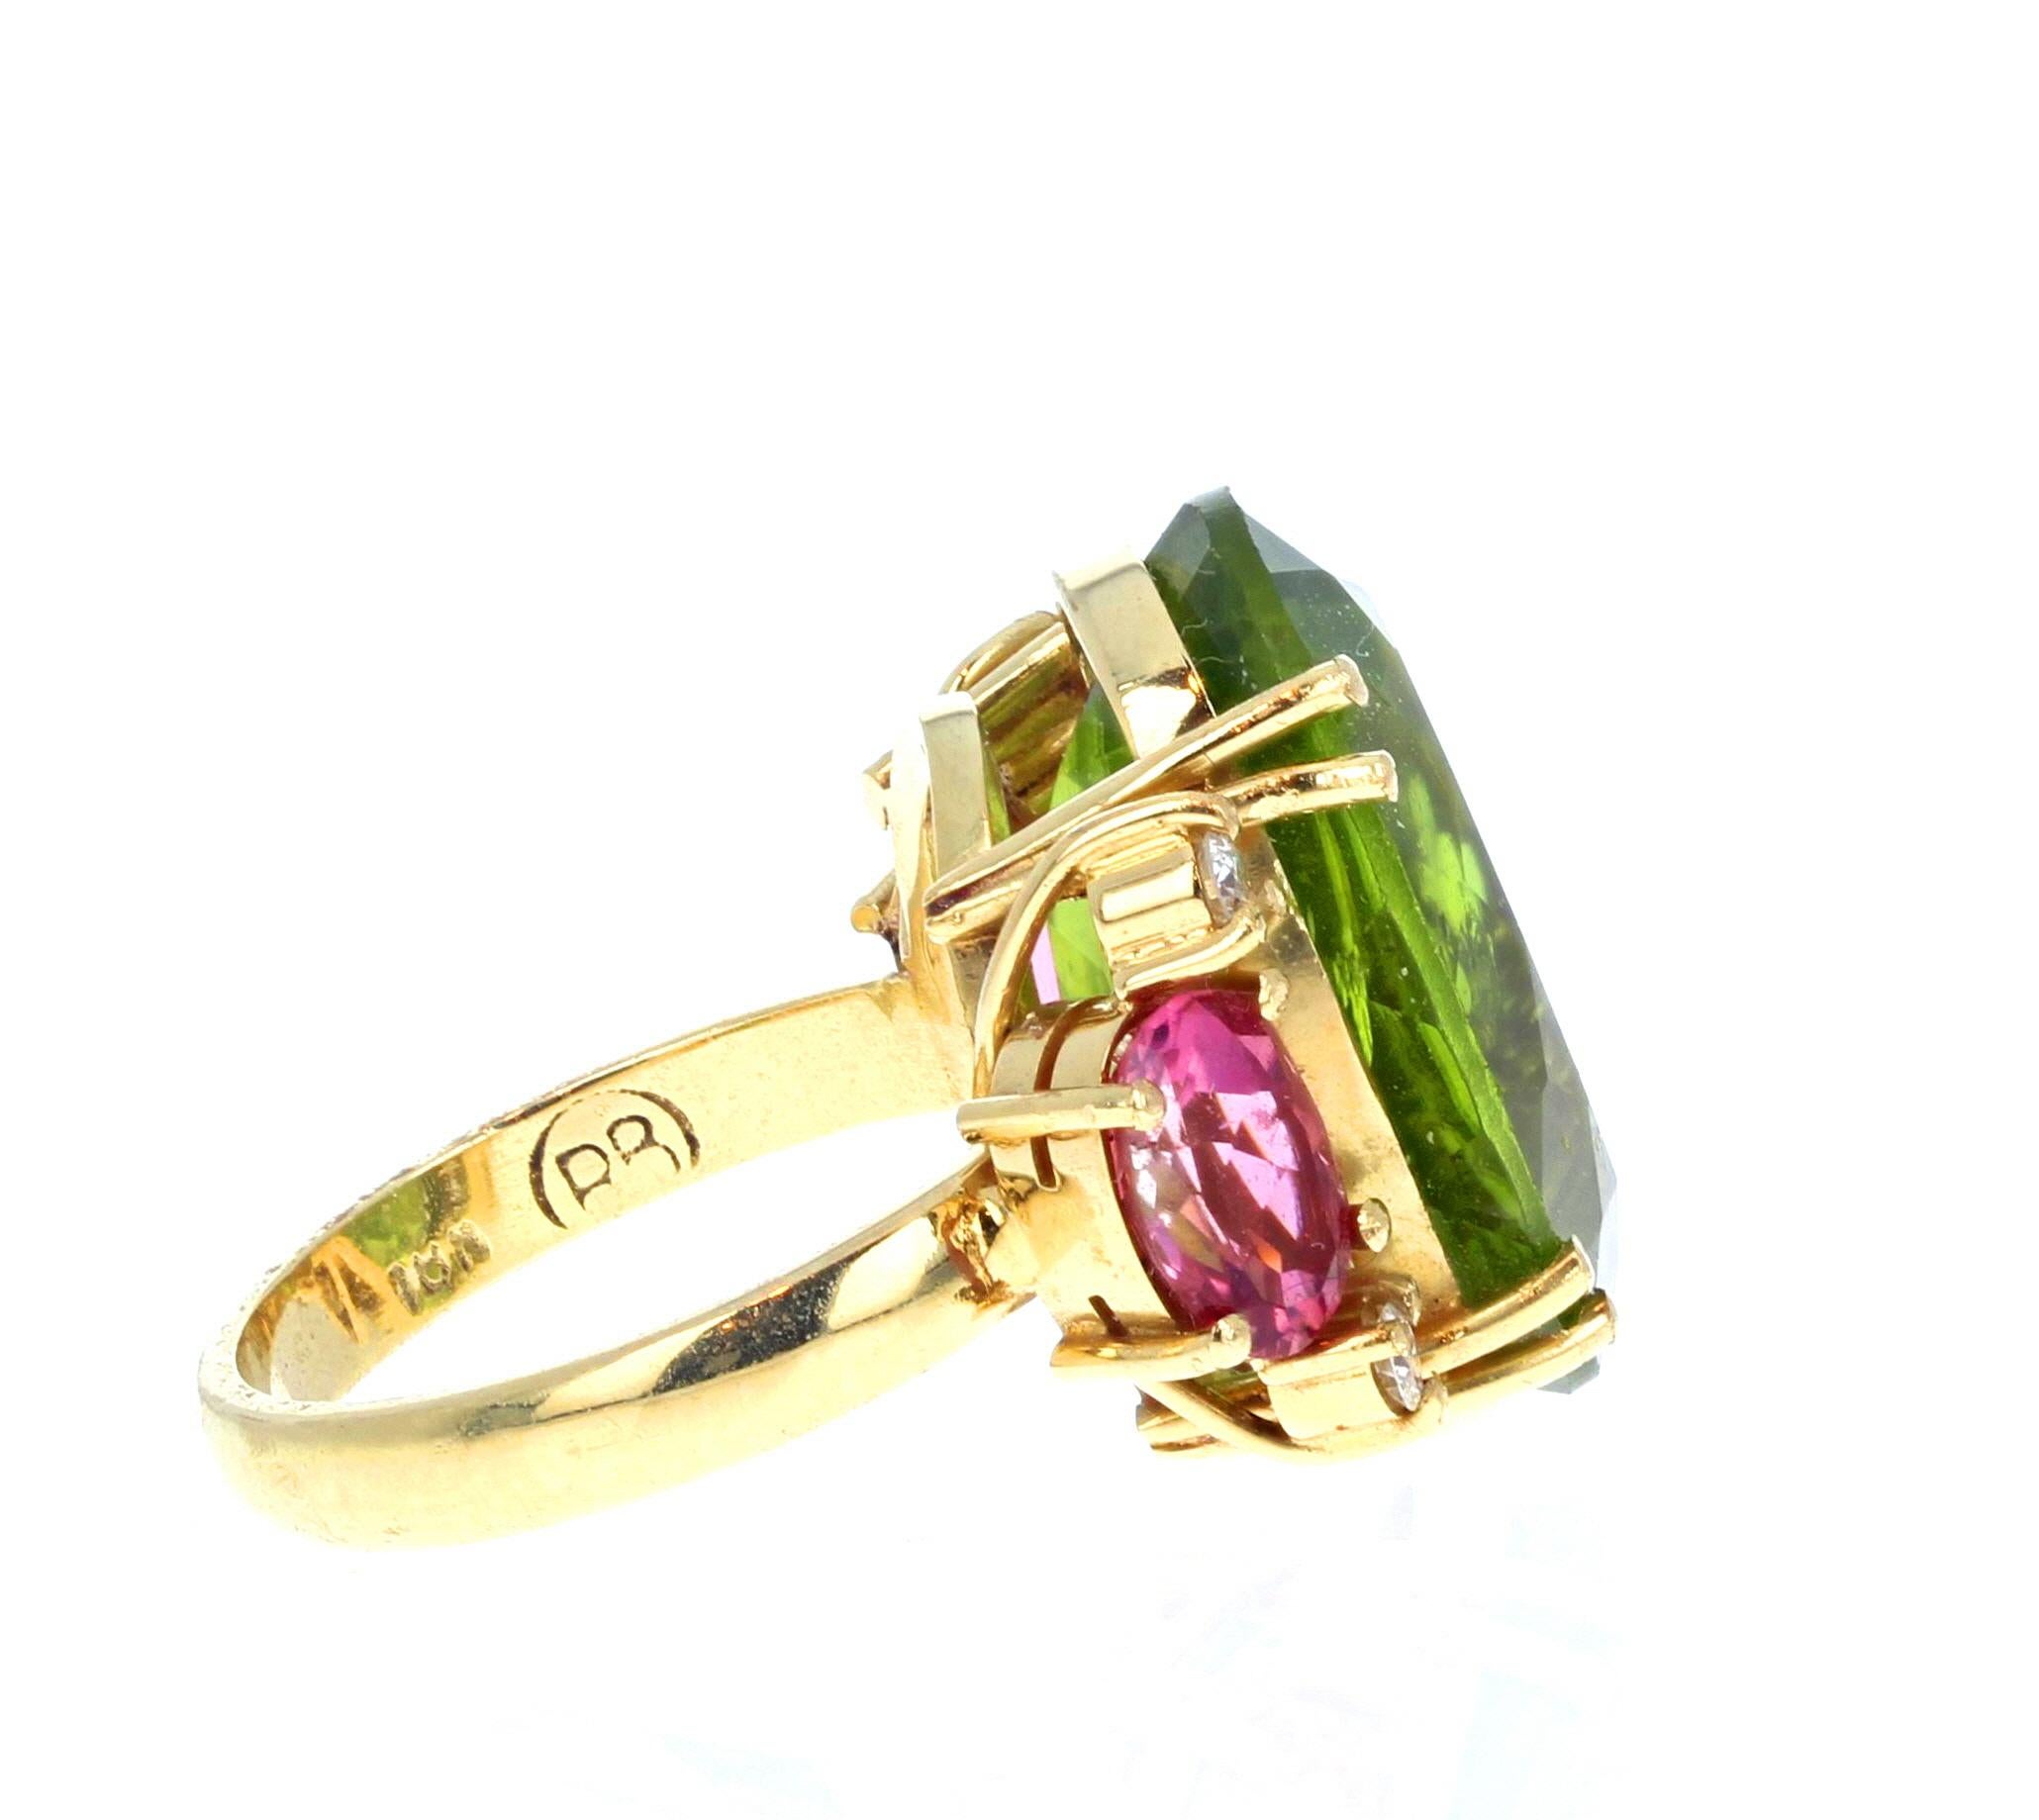 Women's or Men's AJD Magnificent Brilliant 14 Ct Green&Pink Tourmalines, Diamonds 18Kt Gold Ring For Sale